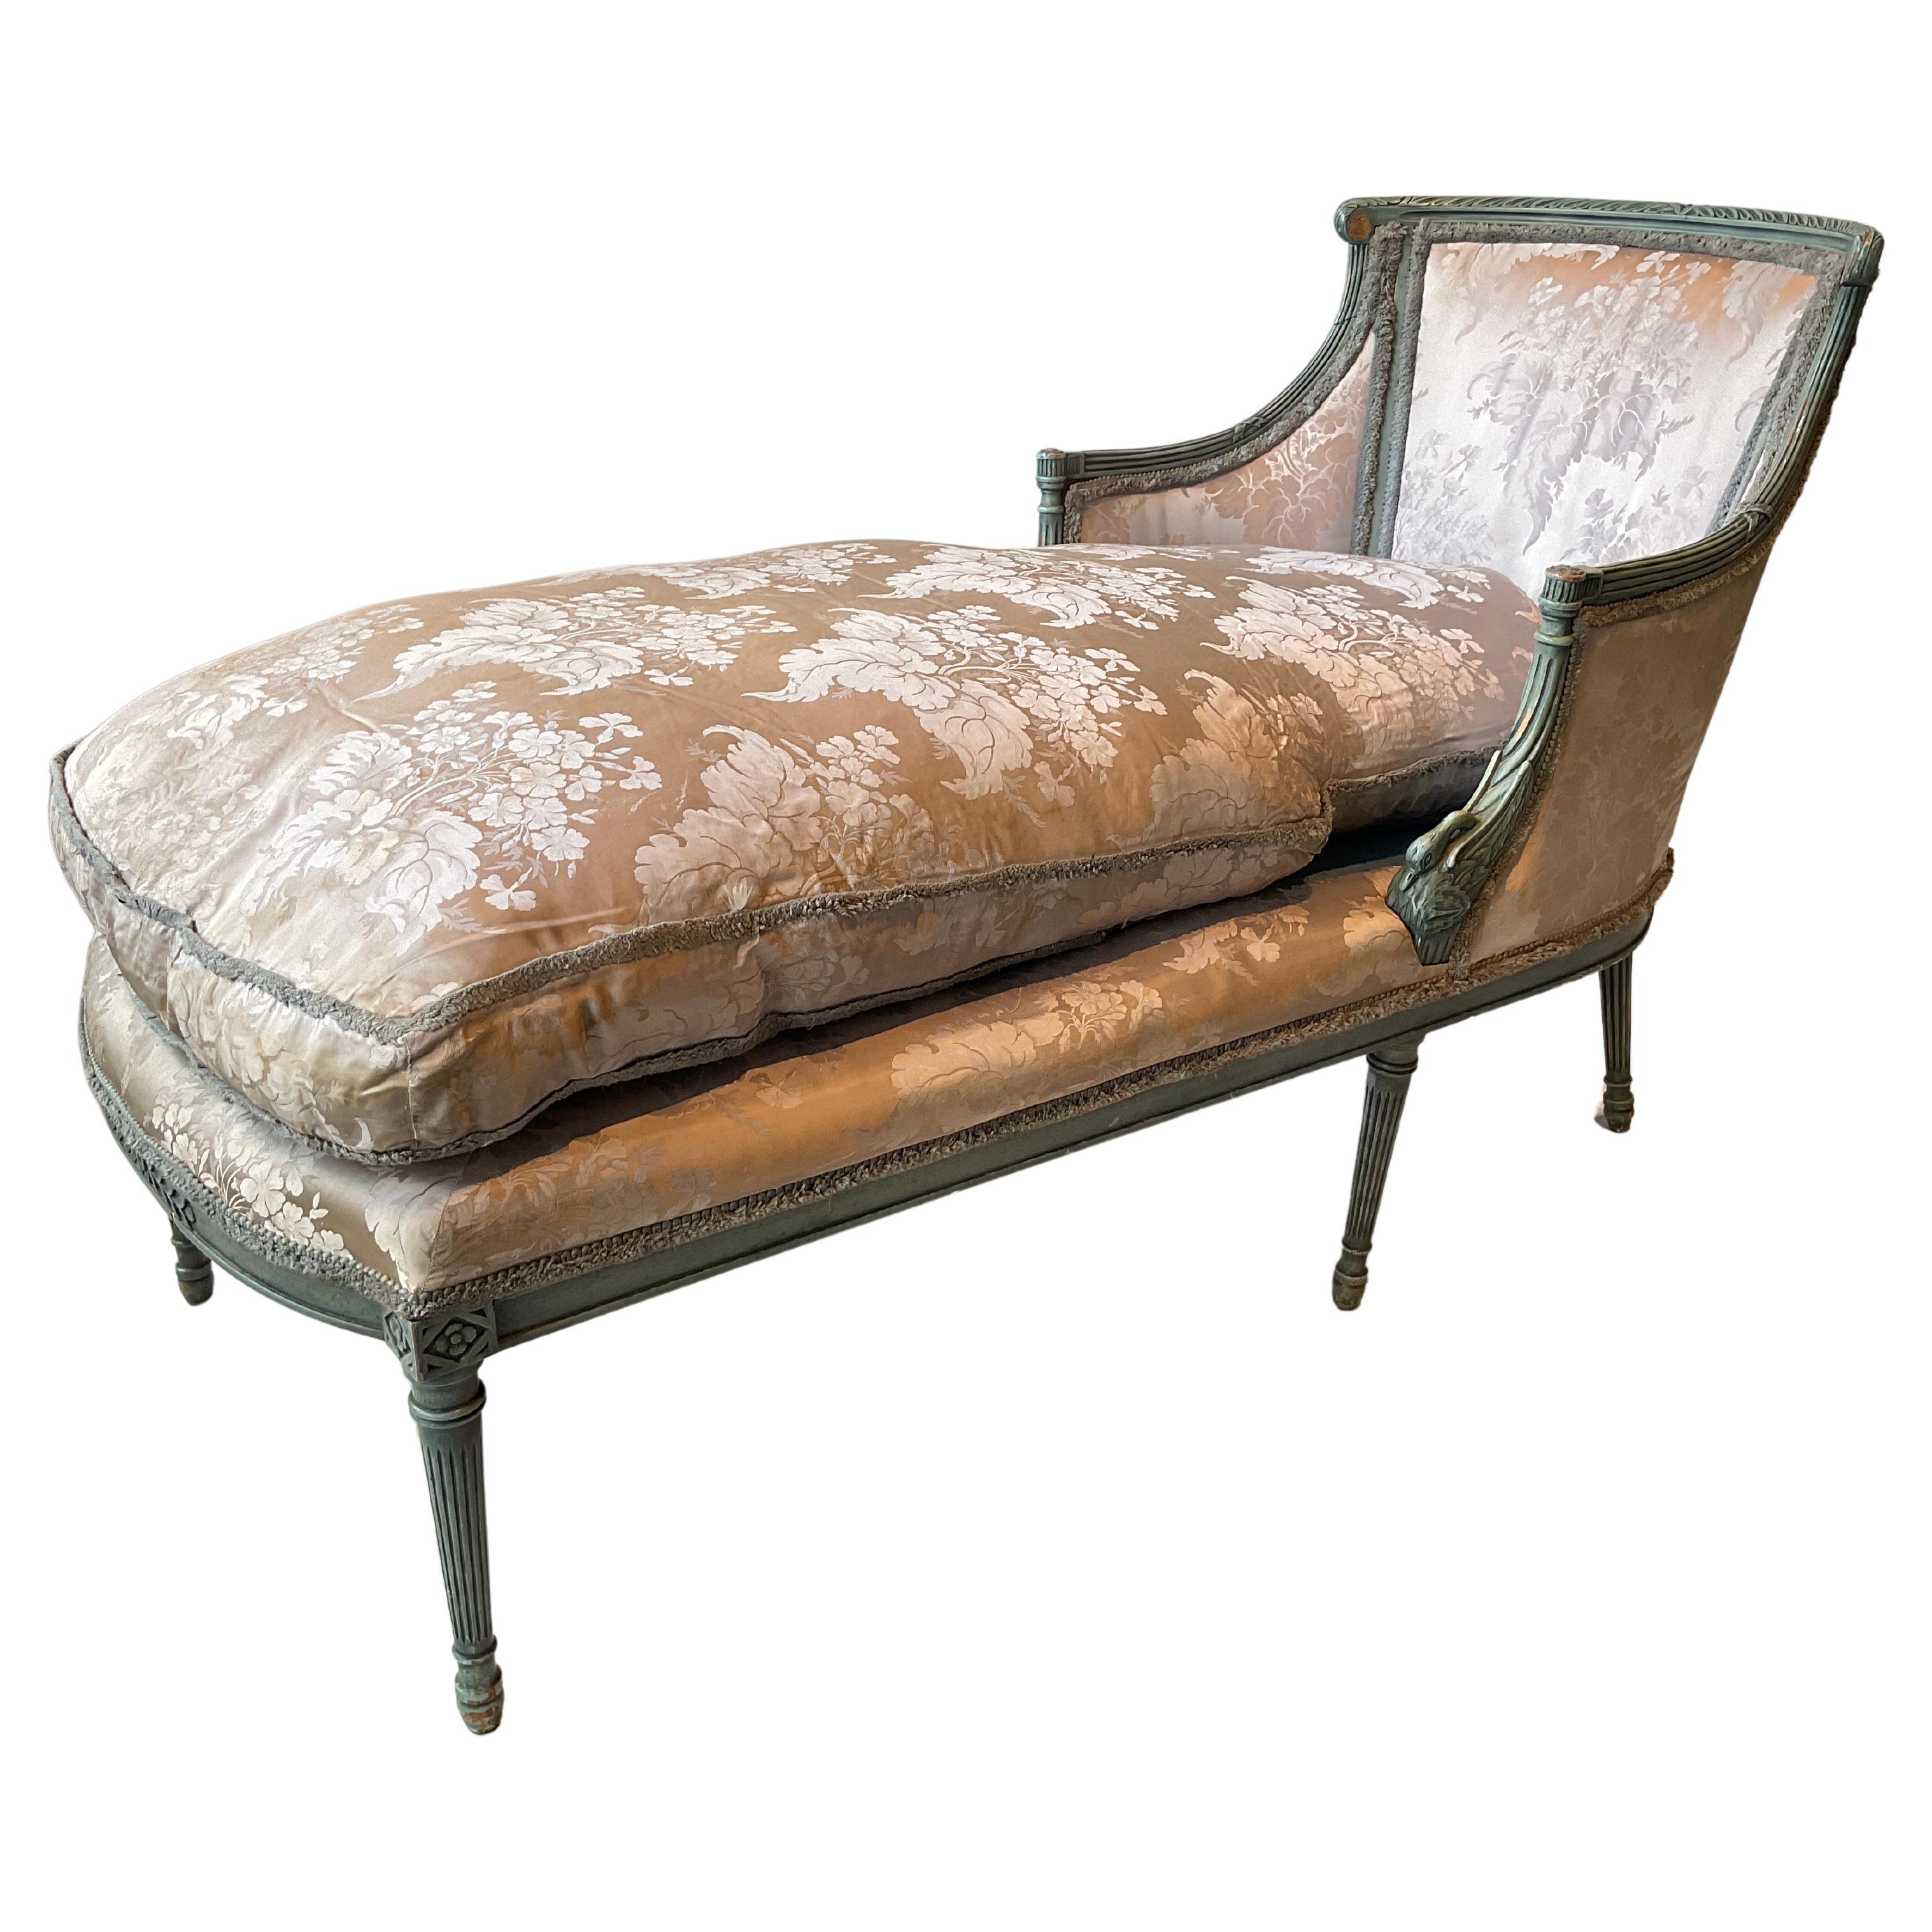 1940s French Carved wood swan chaise with down cushion. Needs reupholstering. Missing 2 florets on top as shown in picture. Middle 2 legs lean in ( that’s how the chaise was made ).